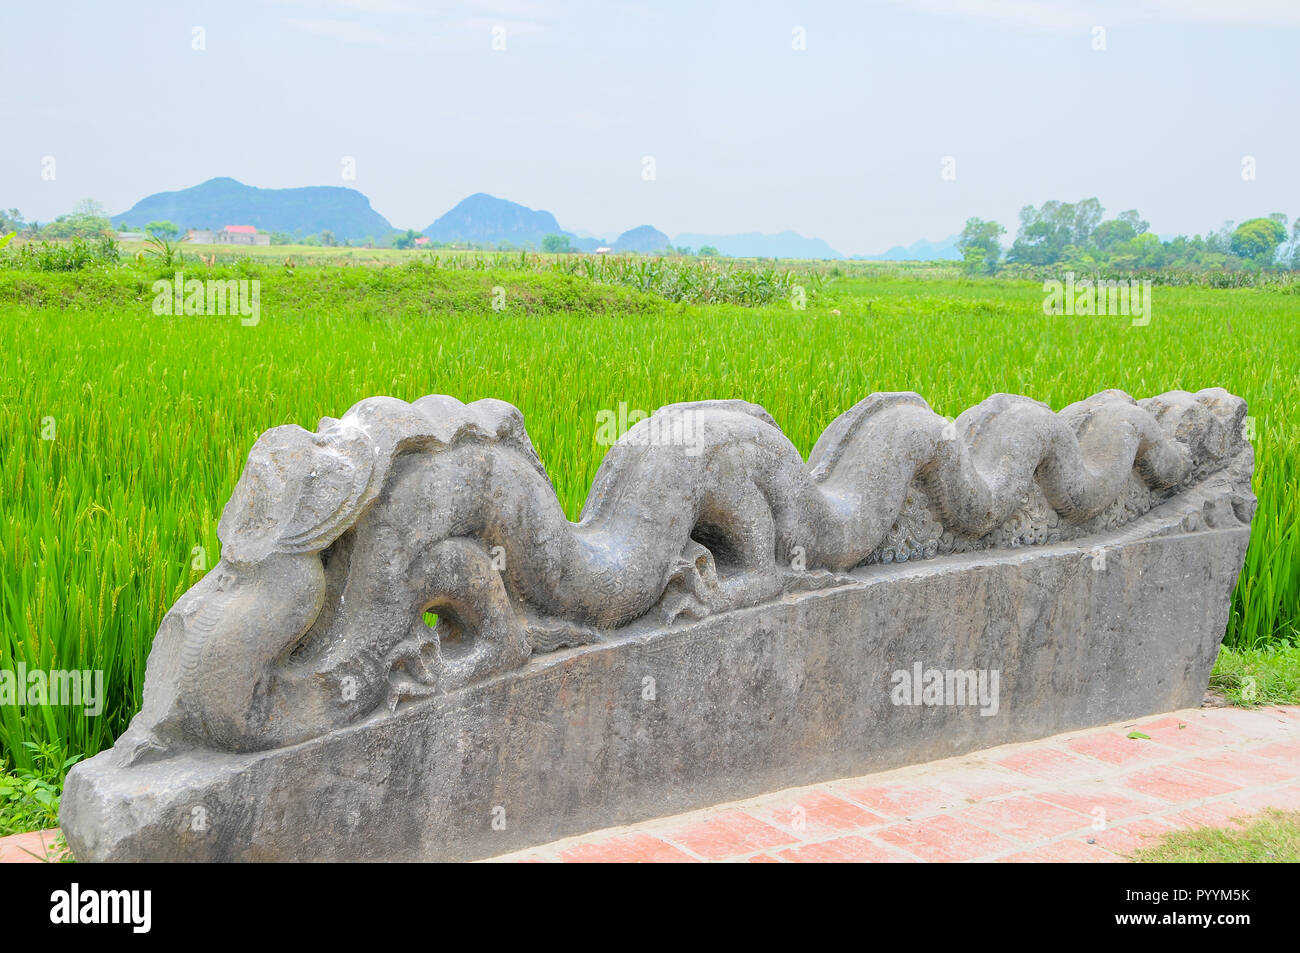 This stone carving of a dragon is the only artifact remaining within the walls of the Ho Citadel, Thanh Hoa Province, Vietnam. Stock Photo